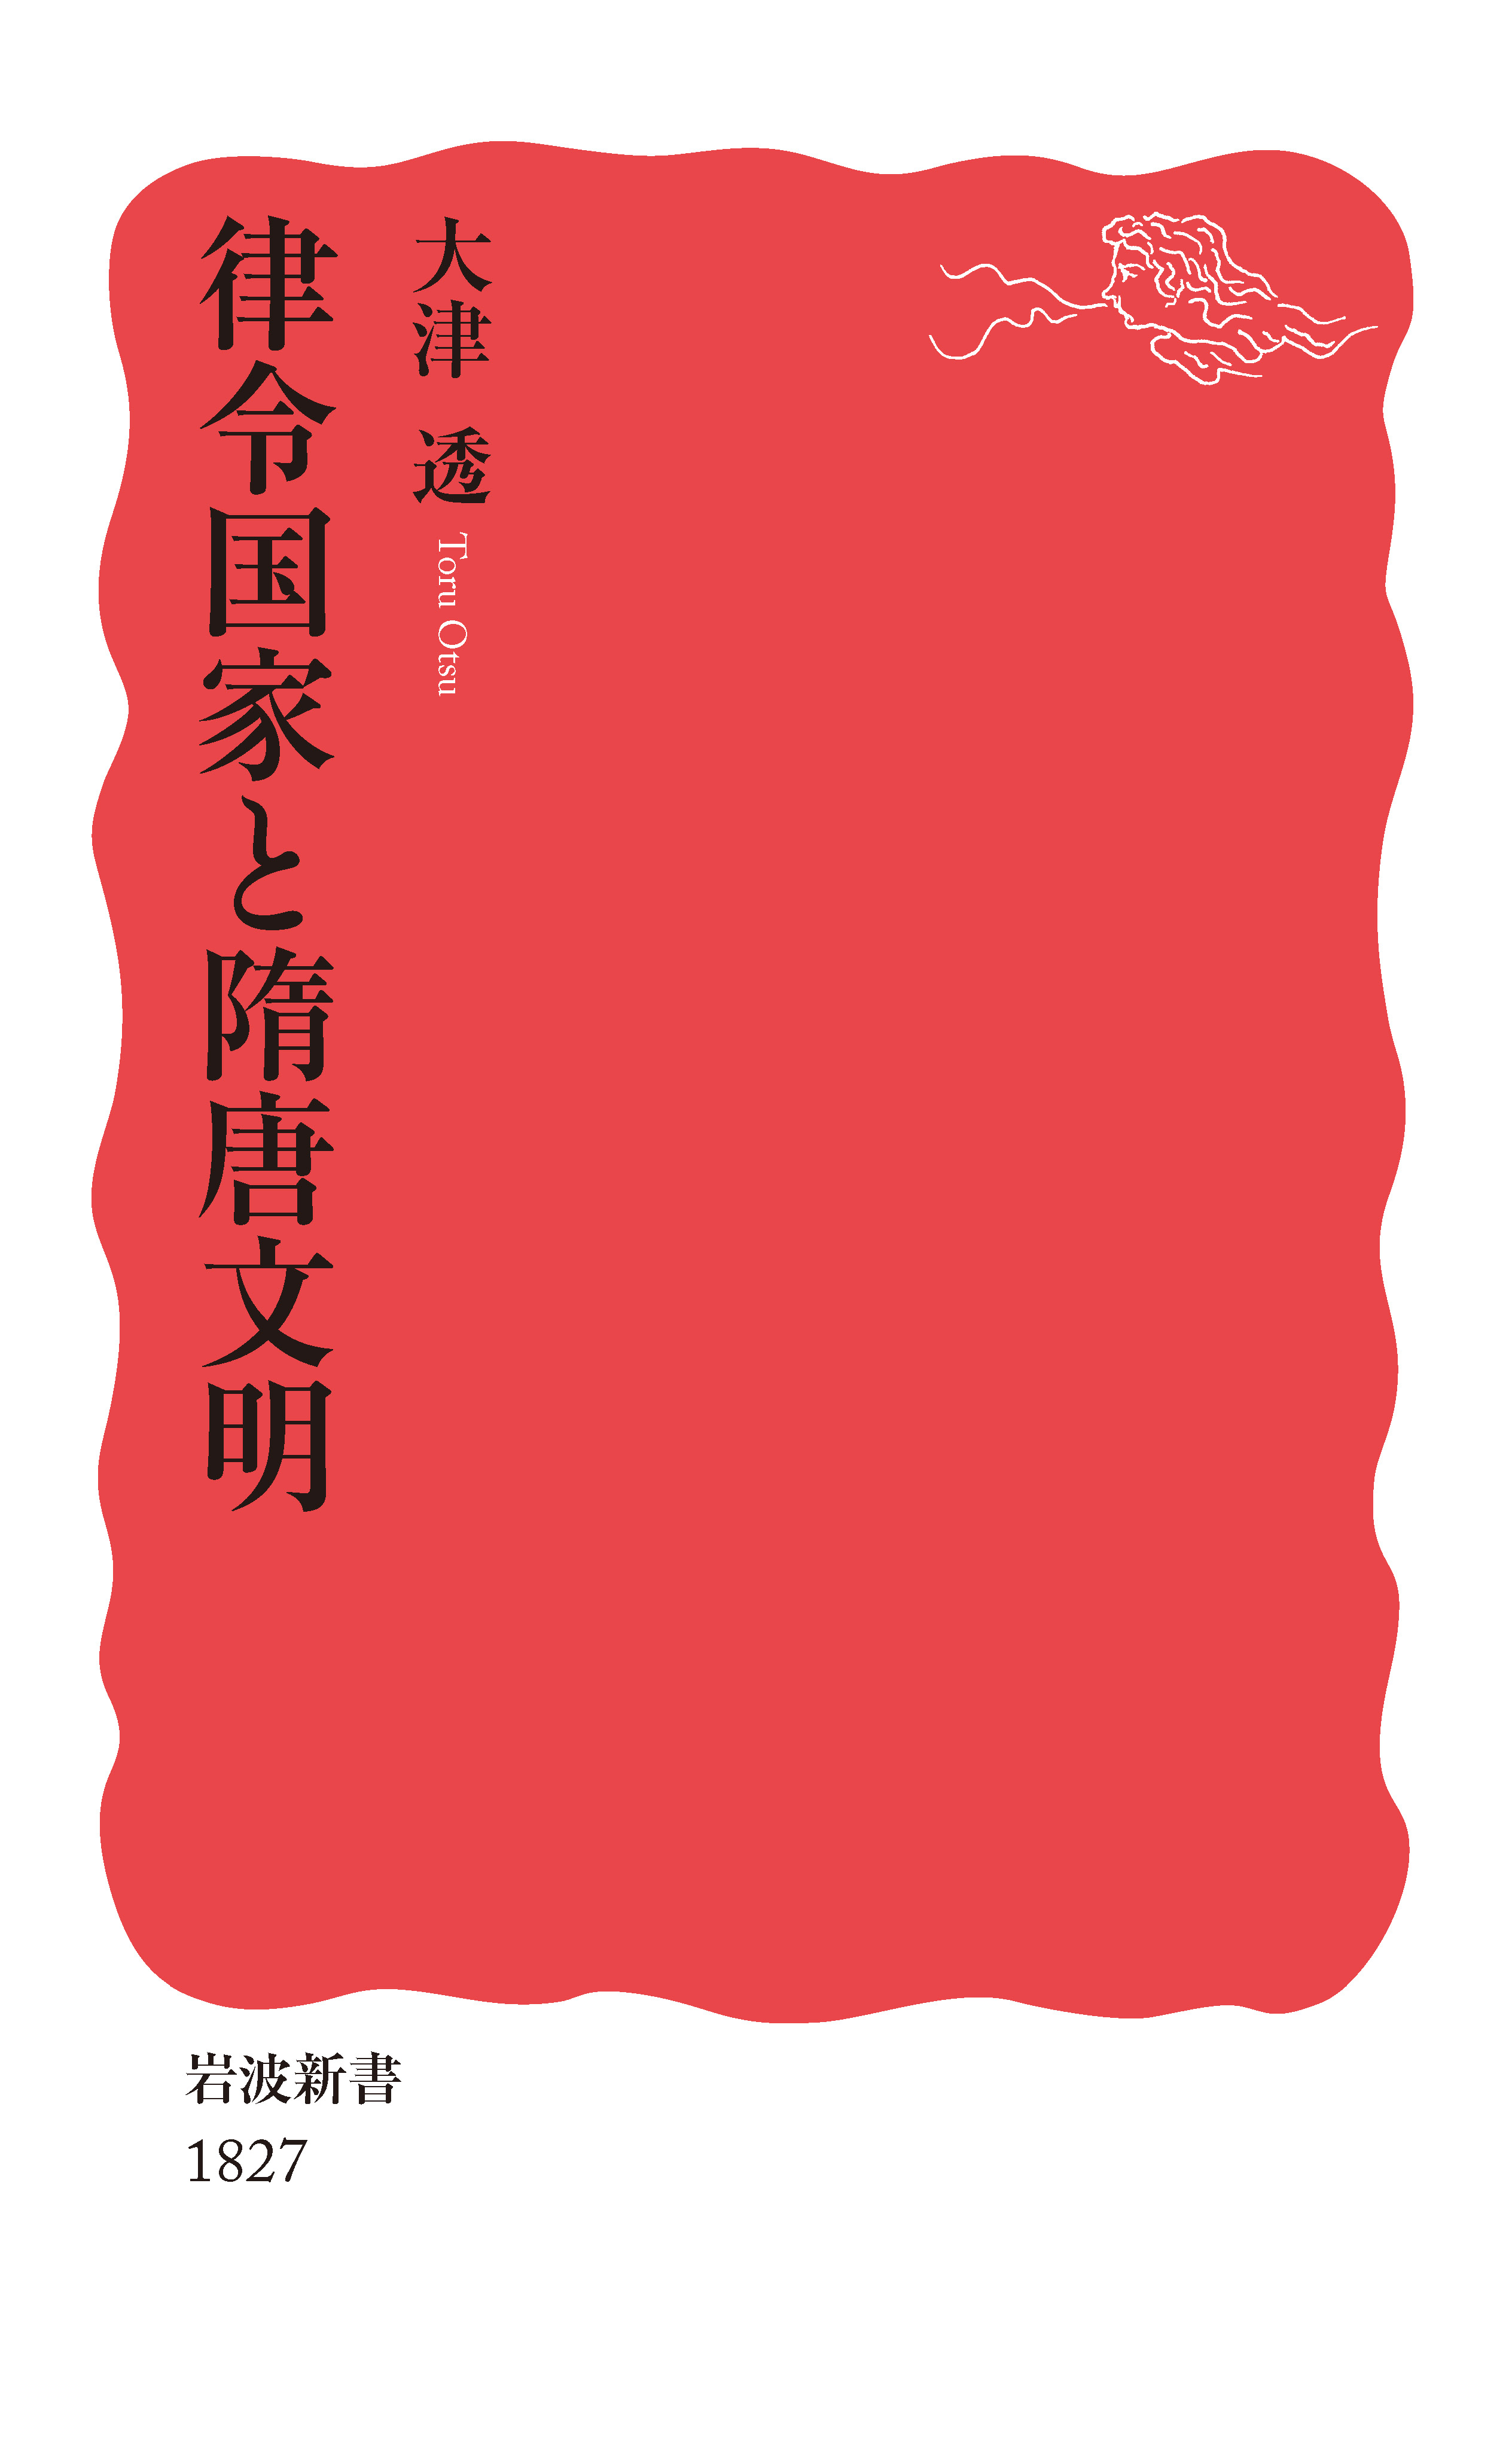 A red and white cover